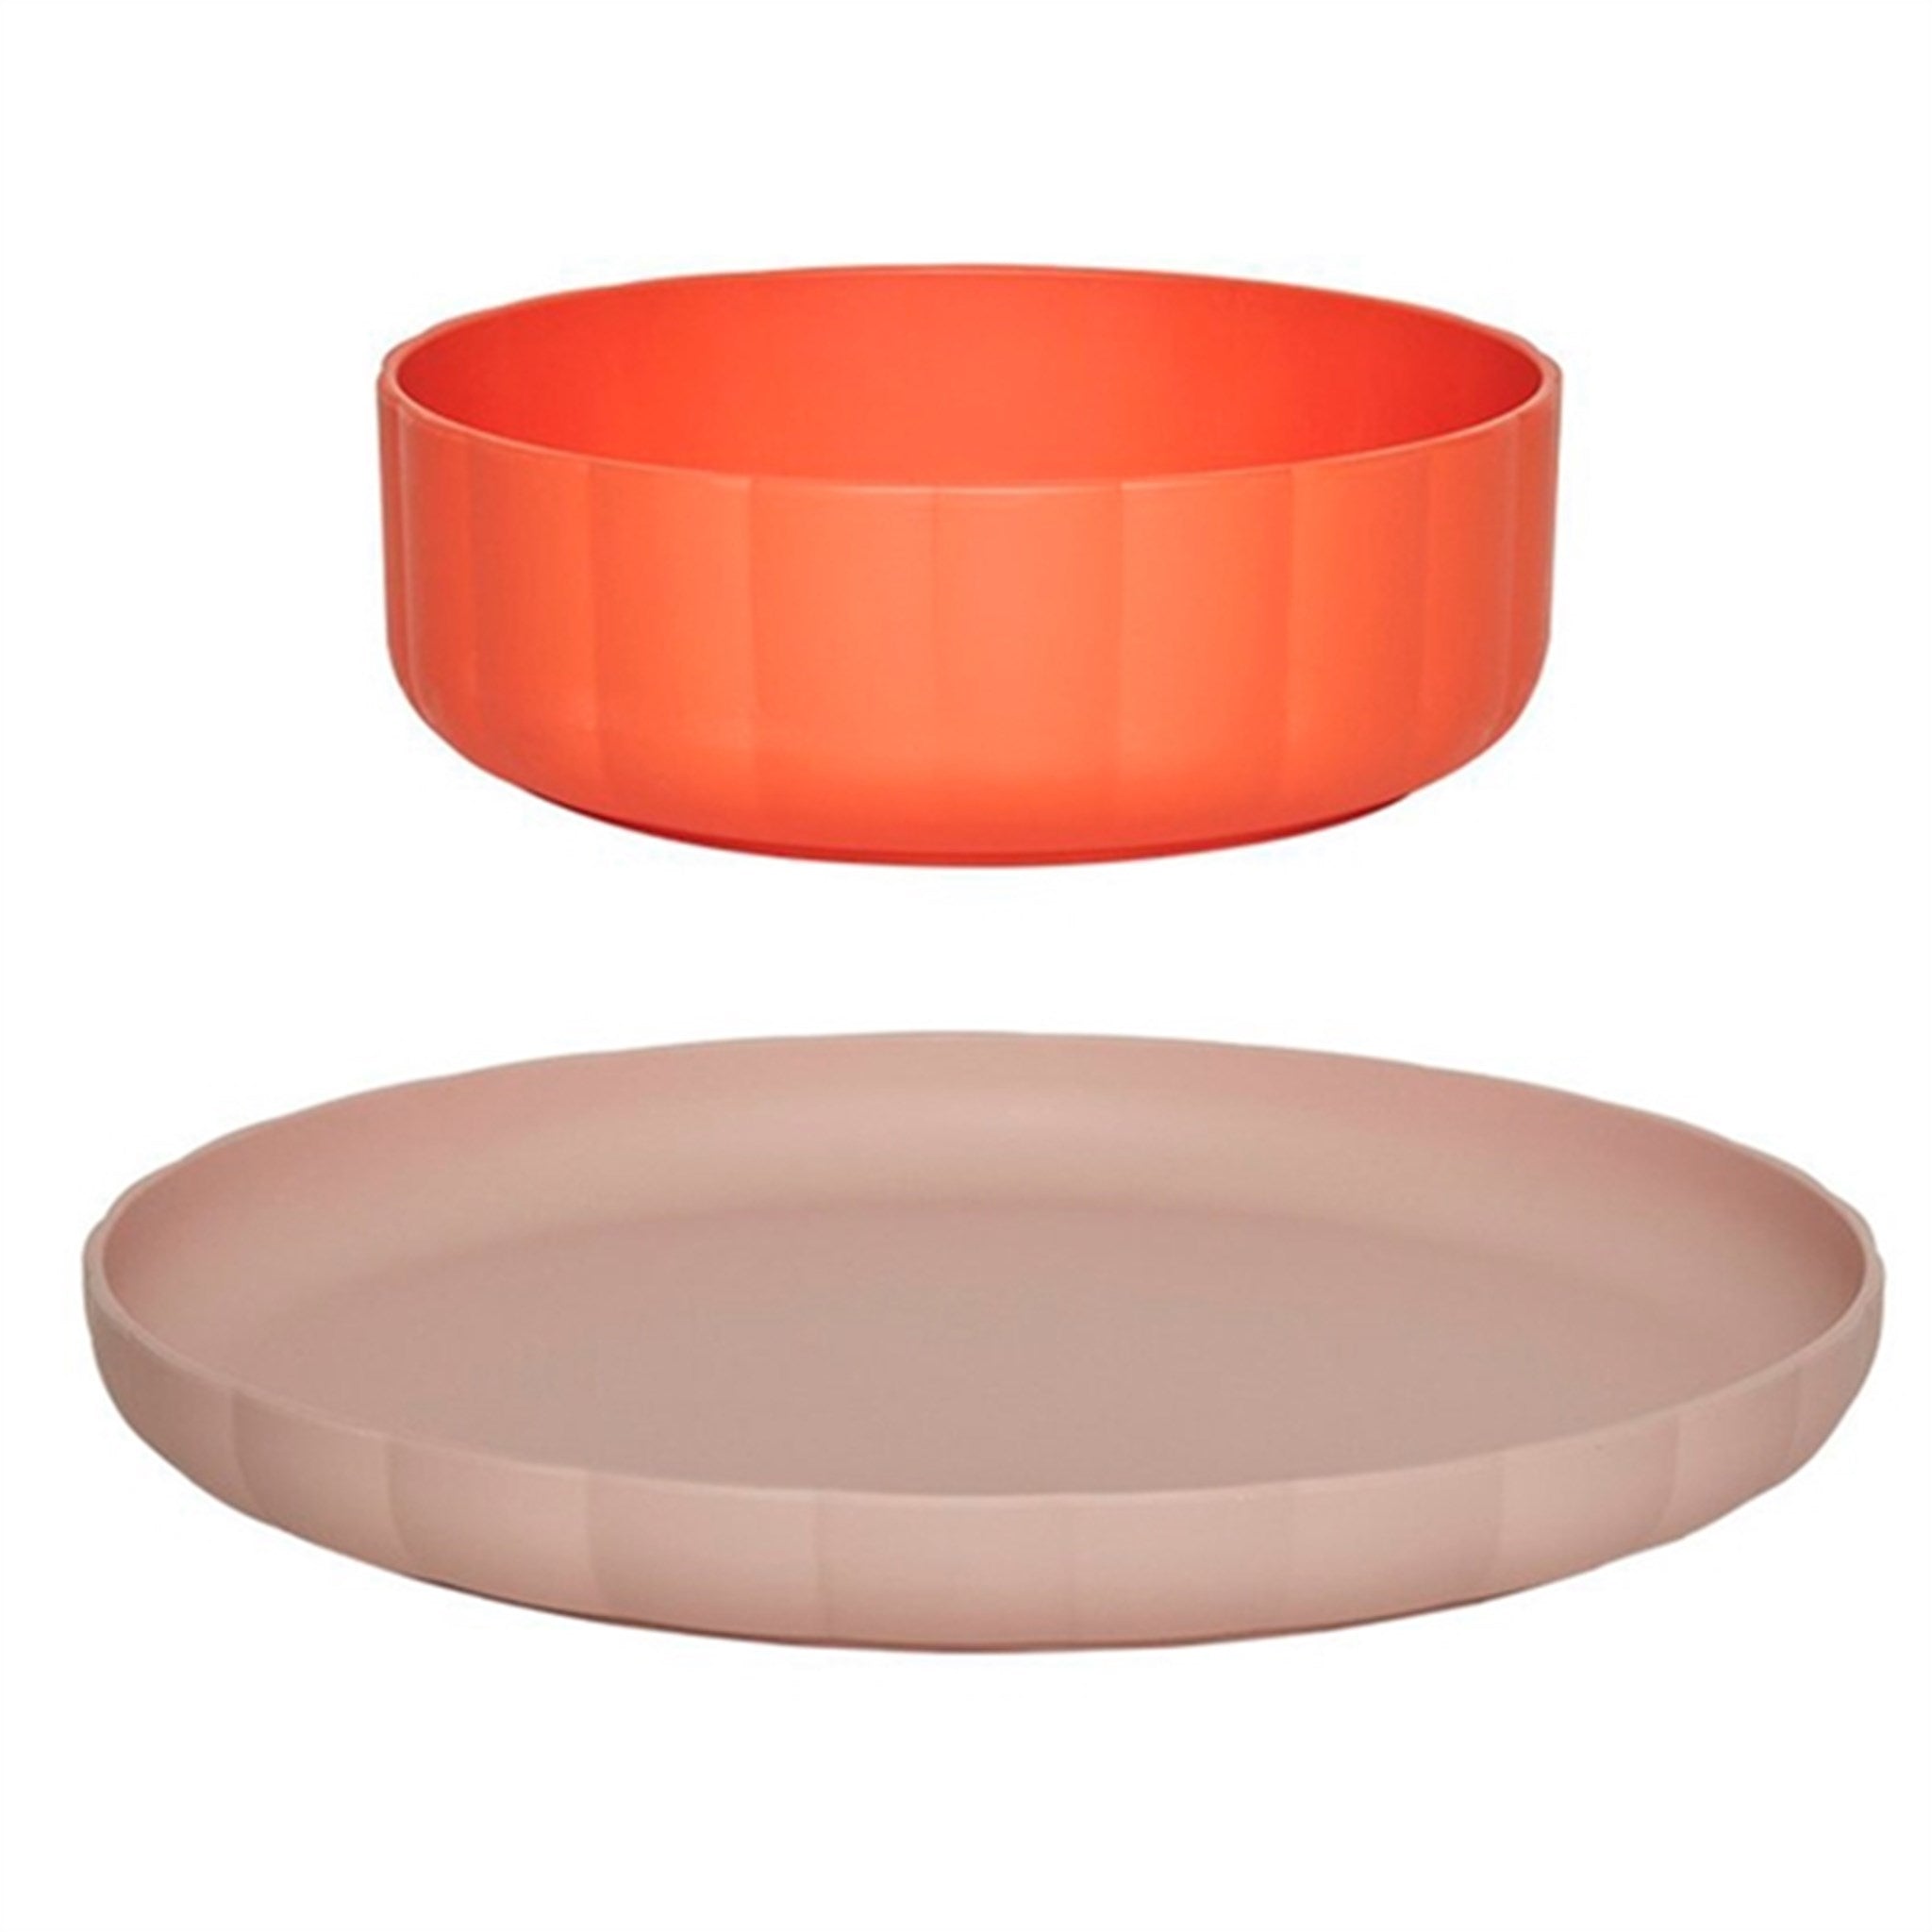 OYOY Pullo Plate and Bowl Rose / Apricot